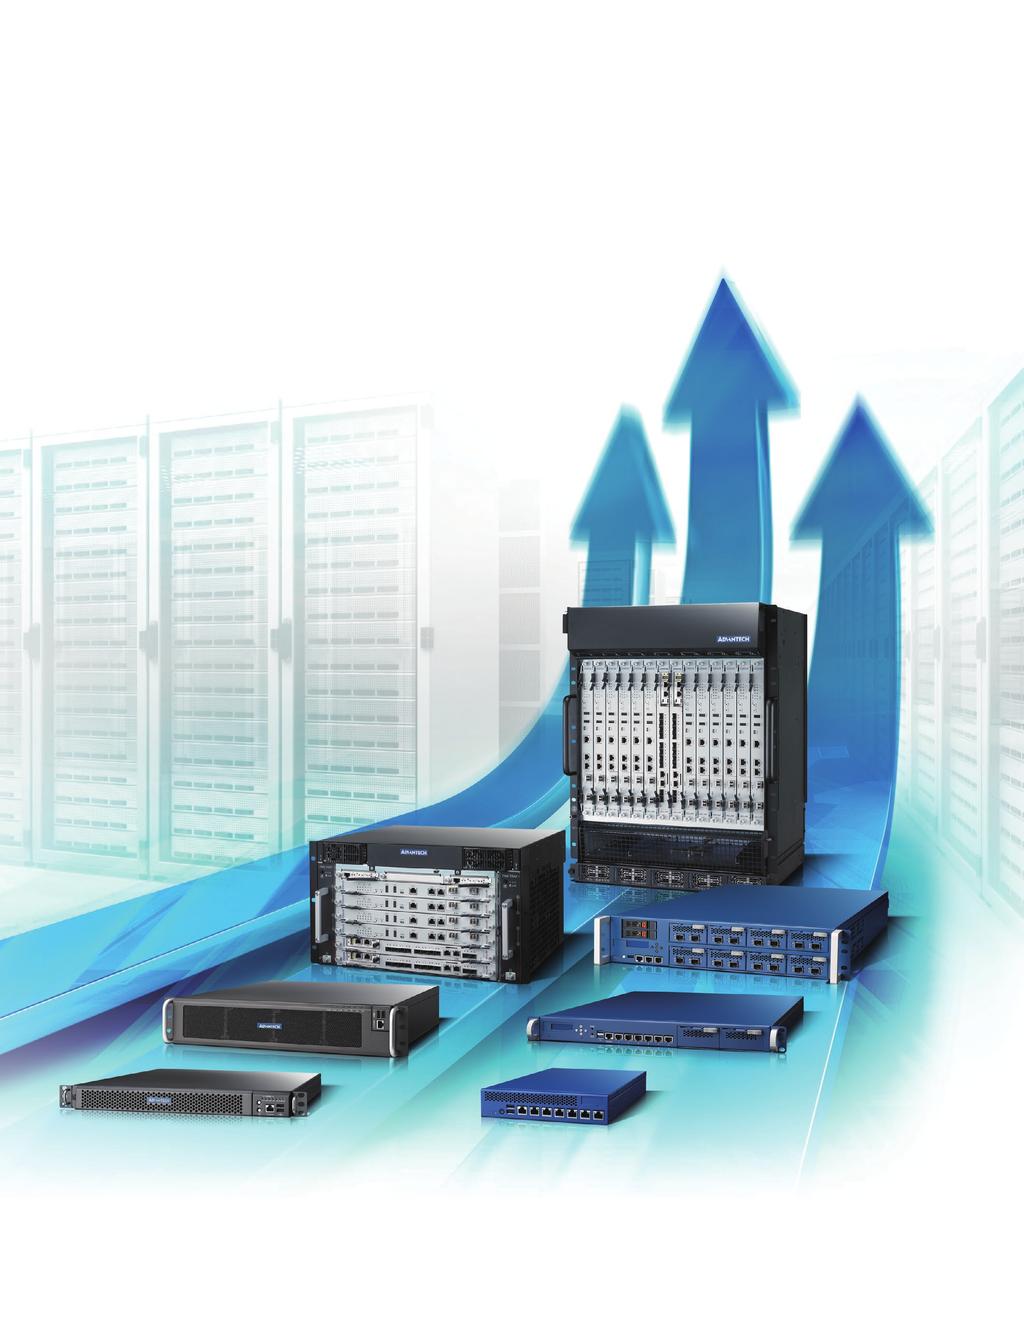 Scalable Network Application Platforms Now you can scale up and out with all the benefits of a common architecture Tabletop & Rackmount